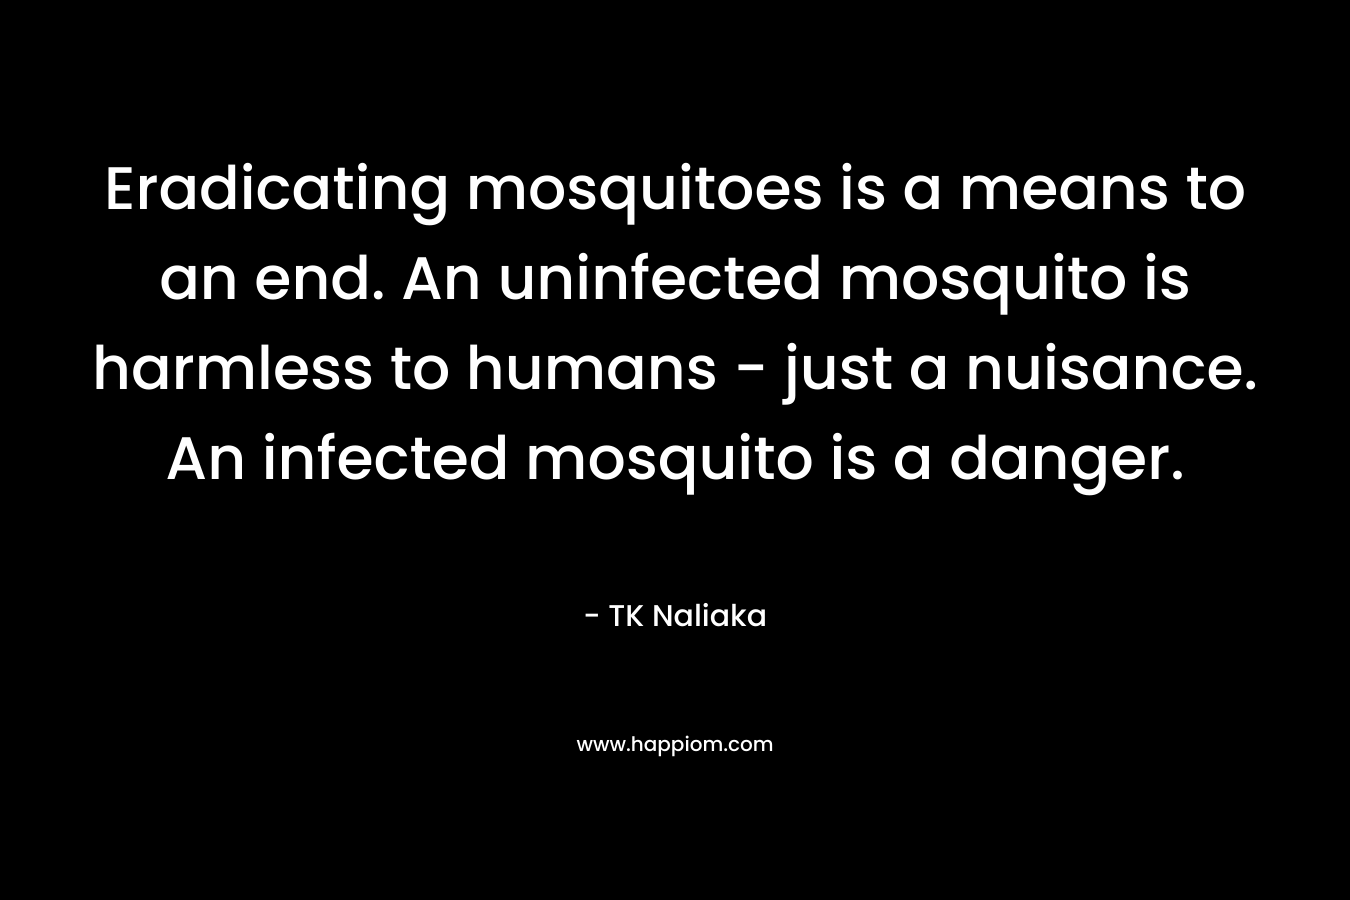 Eradicating mosquitoes is a means to an end. An uninfected mosquito is harmless to humans - just a nuisance. An infected mosquito is a danger.